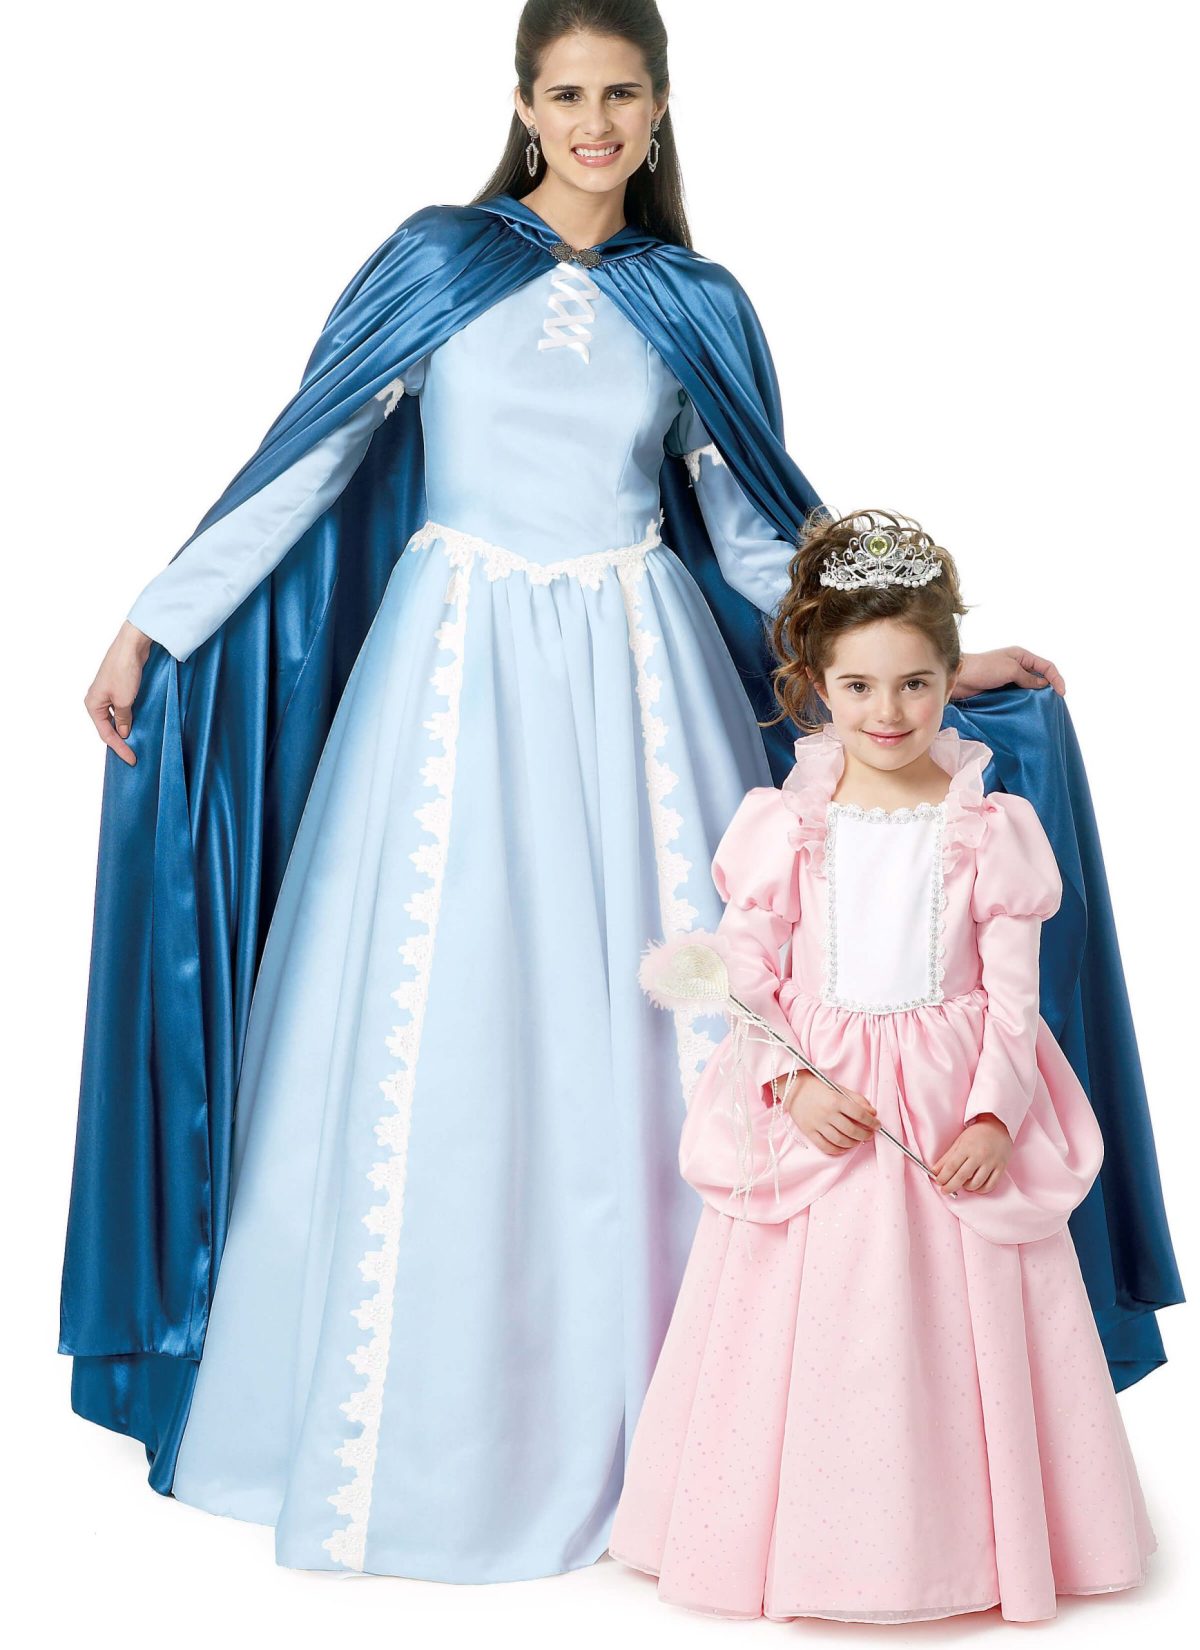 McCall's Sewing Pattern M6420 Misses'/Children's/Girls' Costumes